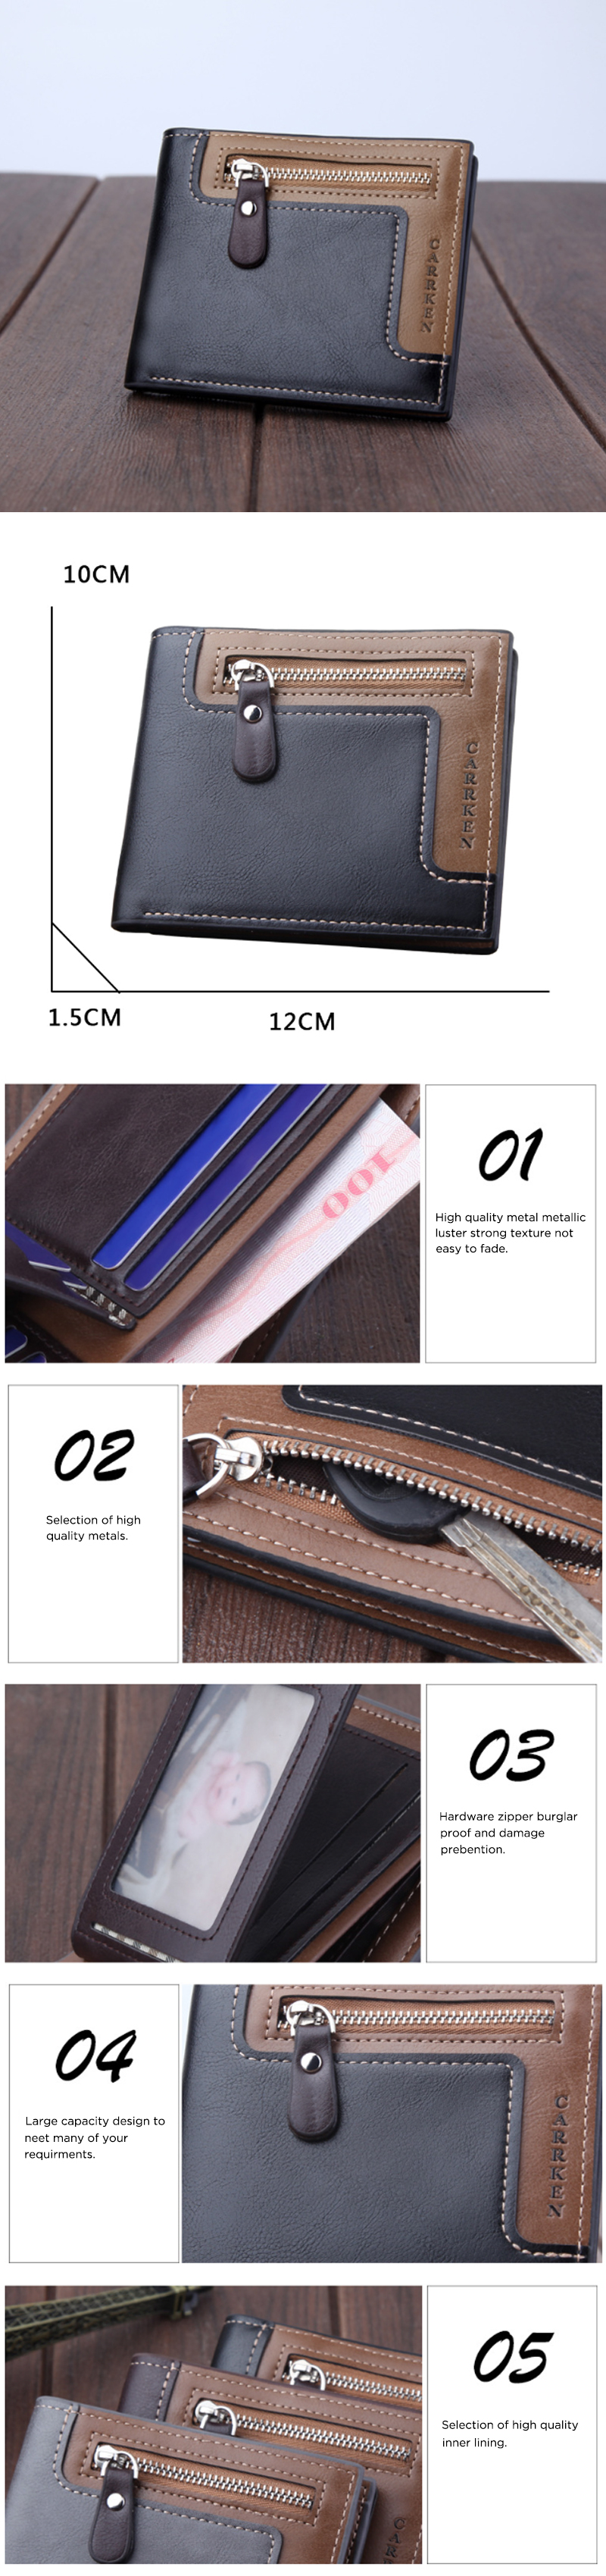 IPReereg-Mens-Short-Wallet-Leather-Travel-Trifold-ID-Credit-Card-Holder-Coin-Purse-1604813-1